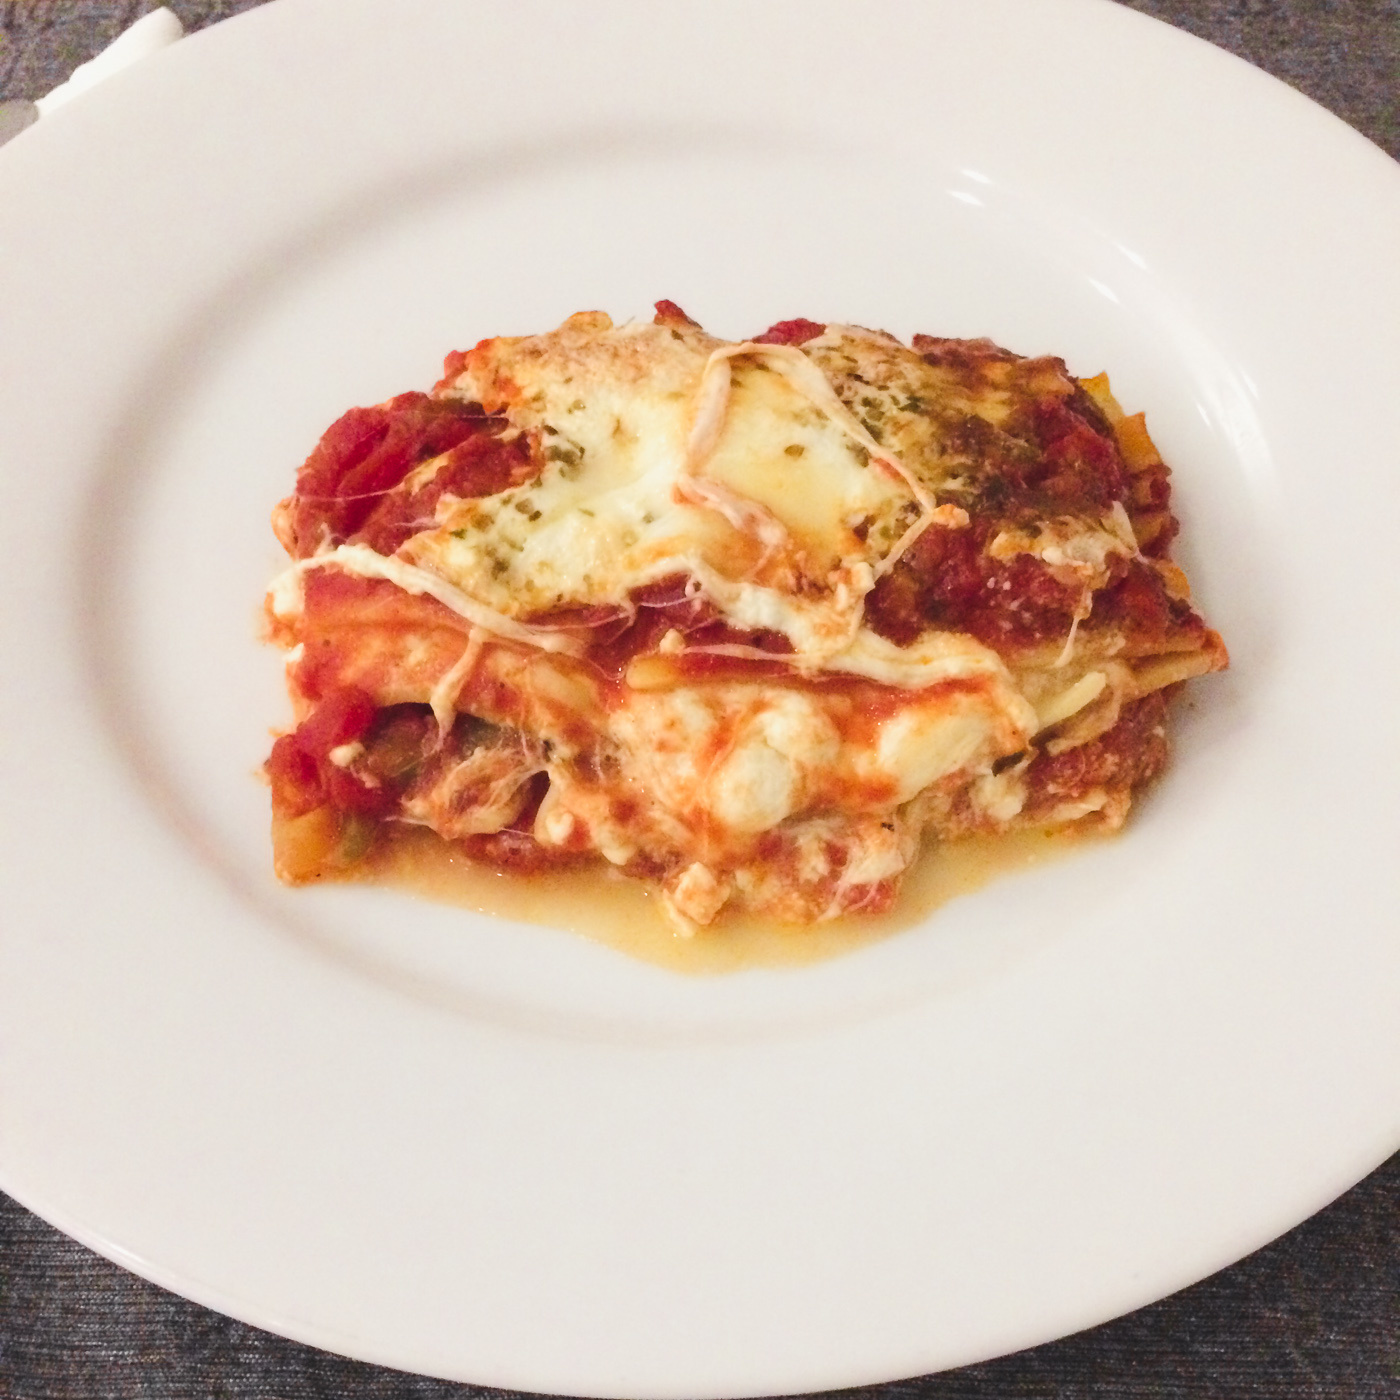 This is a friend's family vegetarian lasagna recipe that I slightly adapted. Its cheesy and heavenly.